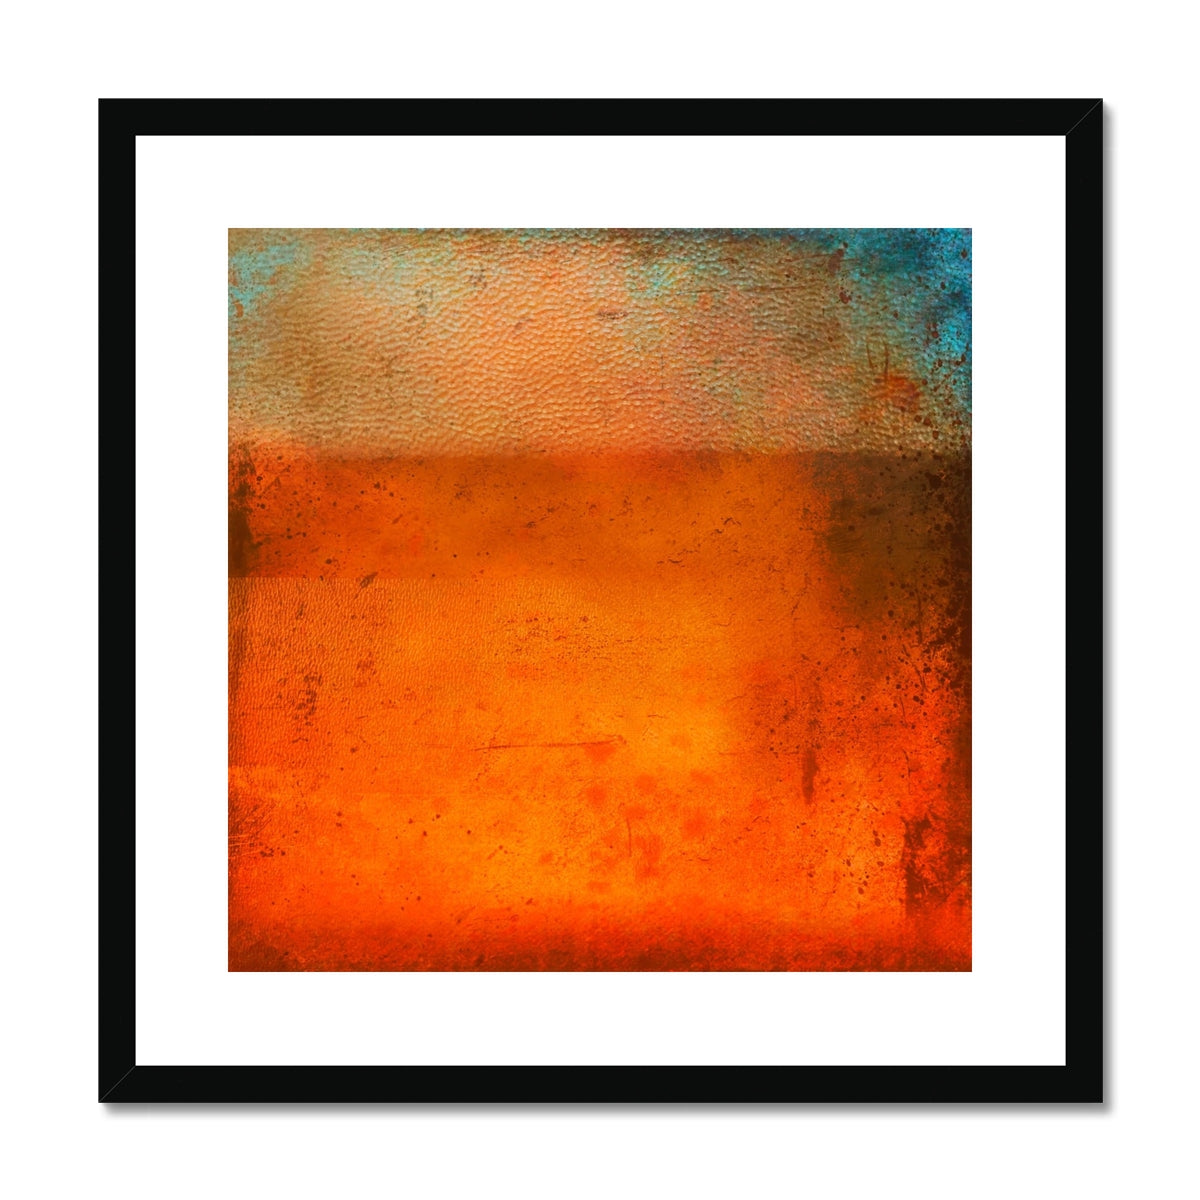 Sunset Horizon Abstract Painting | Framed & Mounted Prints From Scotland-Framed & Mounted Prints-Abstract & Impressionistic Art Gallery-20"x20"-Black Frame-Paintings, Prints, Homeware, Art Gifts From Scotland By Scottish Artist Kevin Hunter